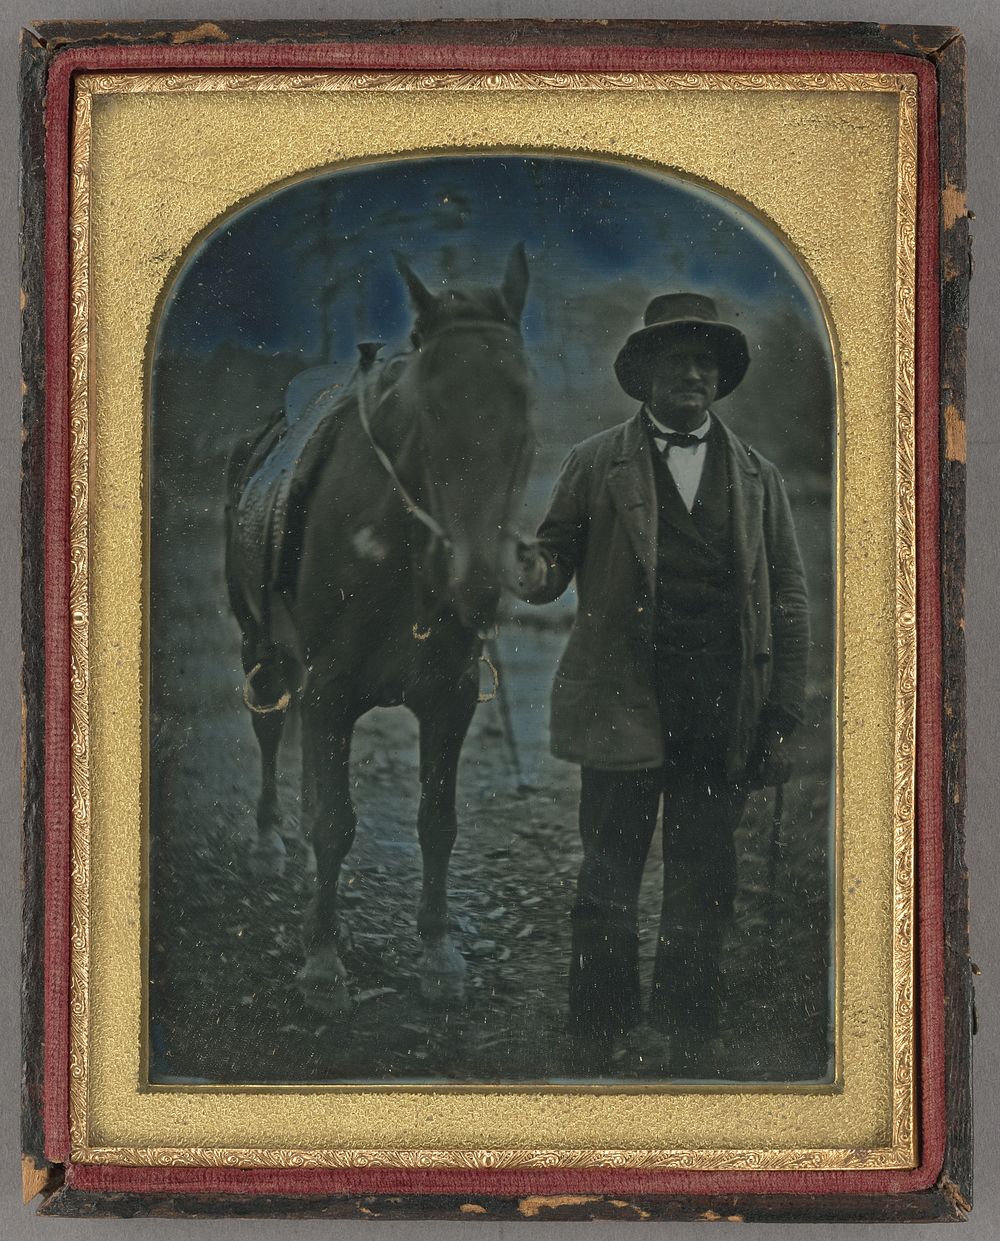 Man and Horse